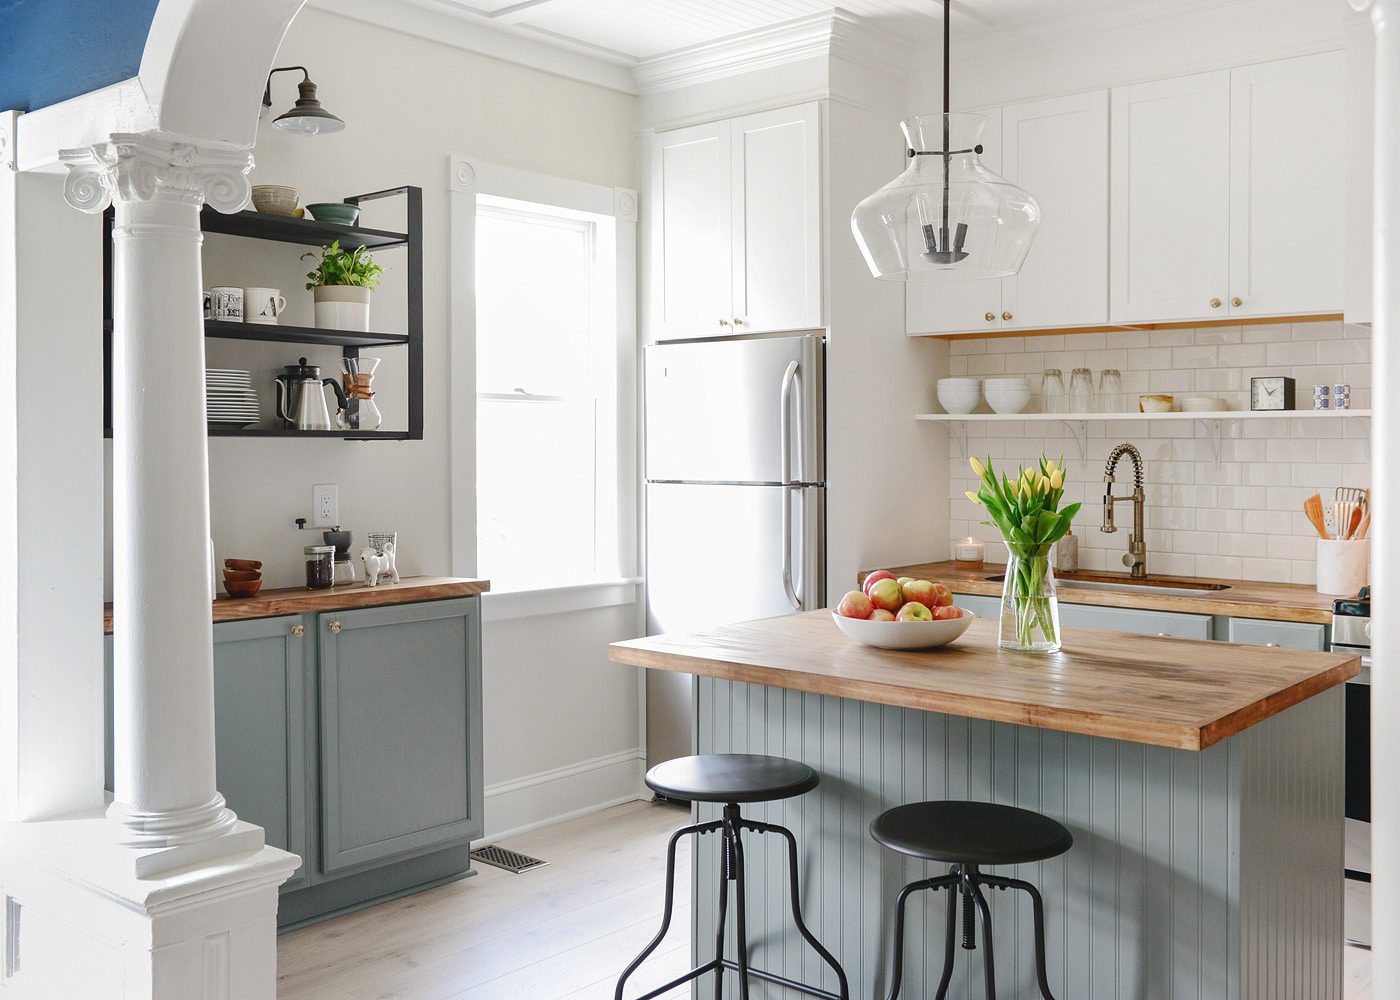 Lowe's Kitchen Makeover: Baltimore Edition! - Yellow Brick Home